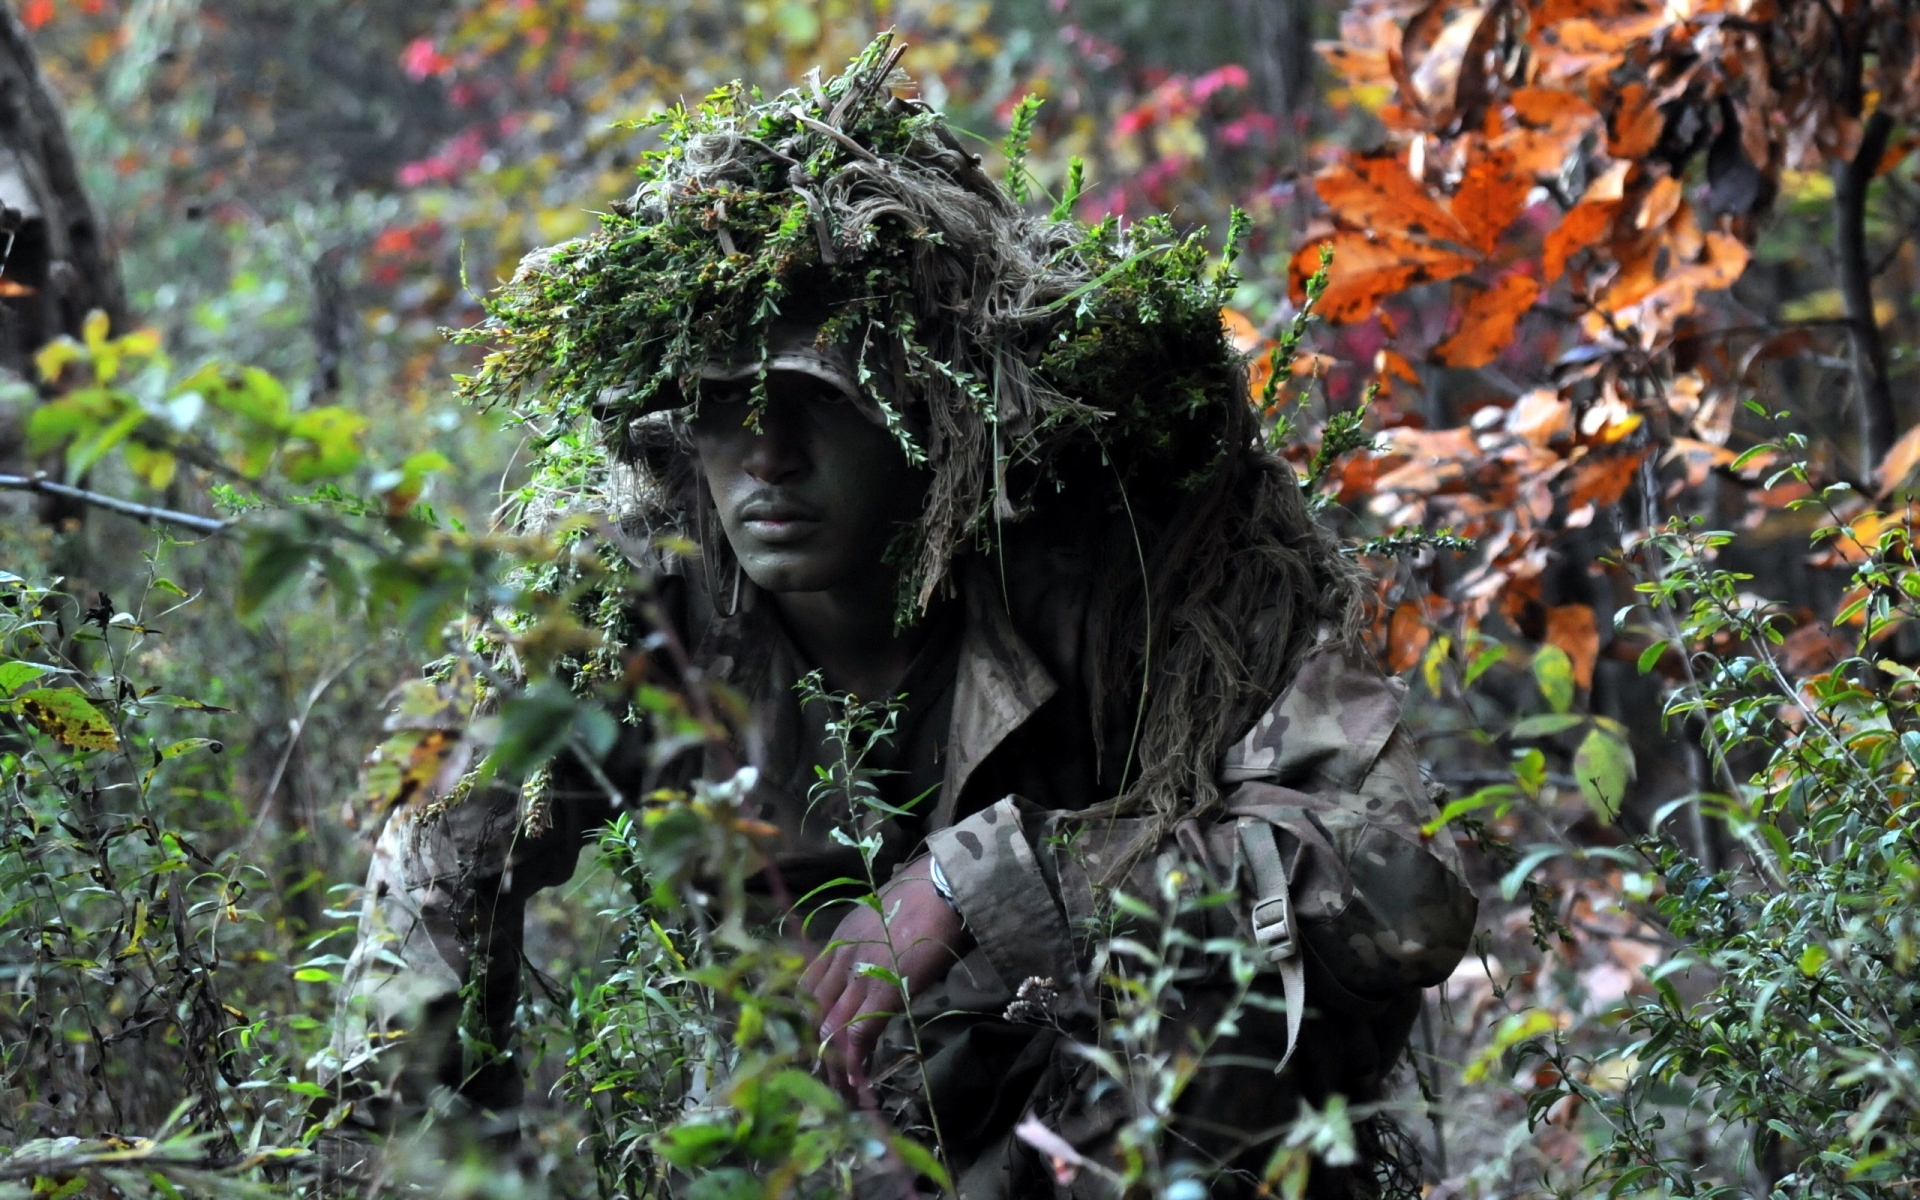 Soldier Camouflage military wallpaper 1920x1200 46791